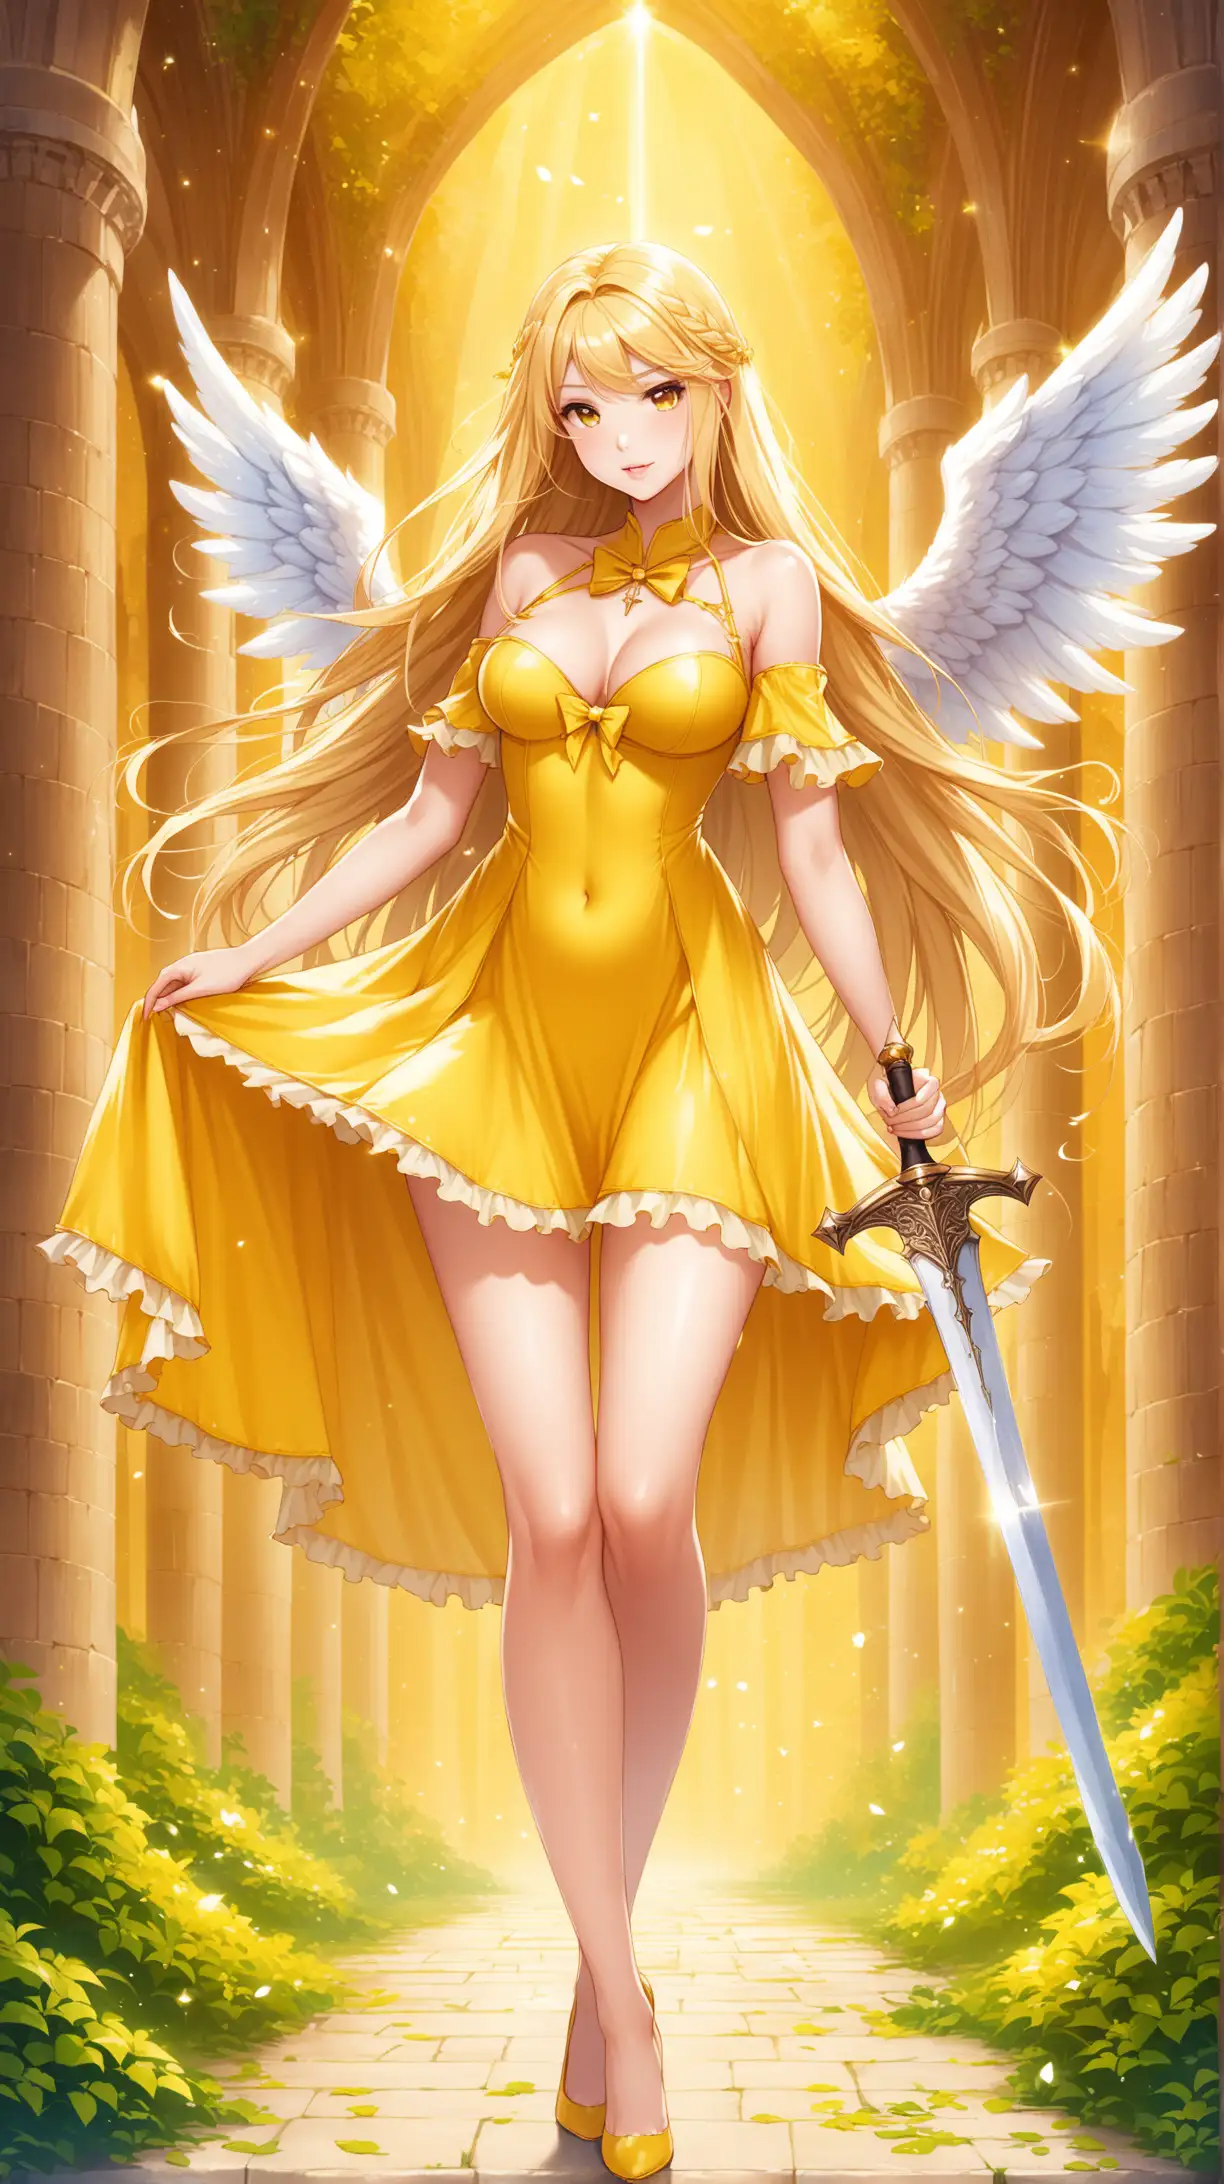 Playful Blonde Women in Sexy Angel Costumes Wielding Swords against Fantastic Background